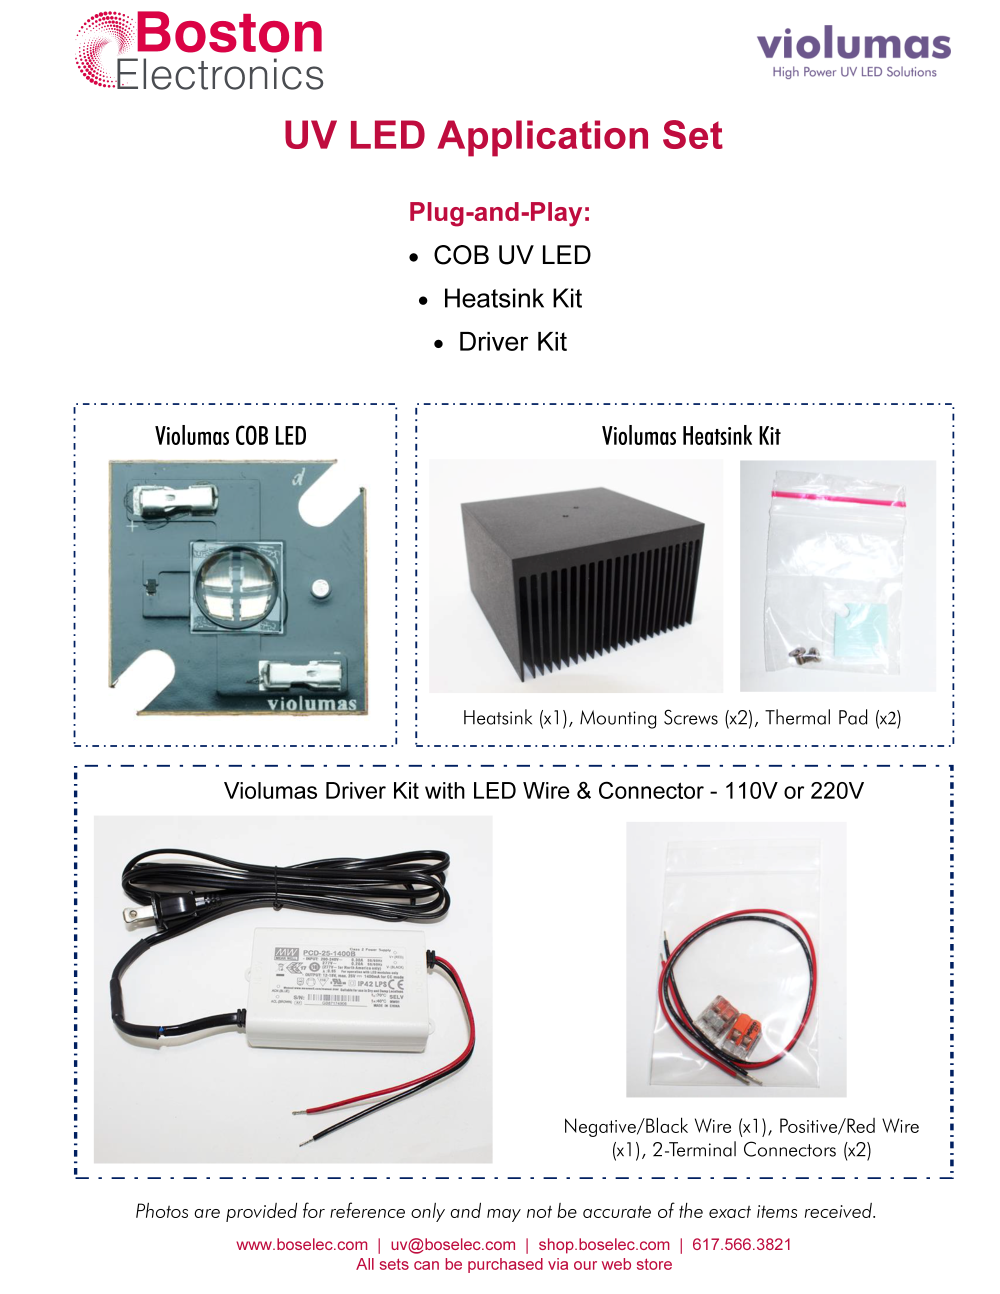 265nm UV LED Application Set- High Power LED, Heat Sink, and Driver